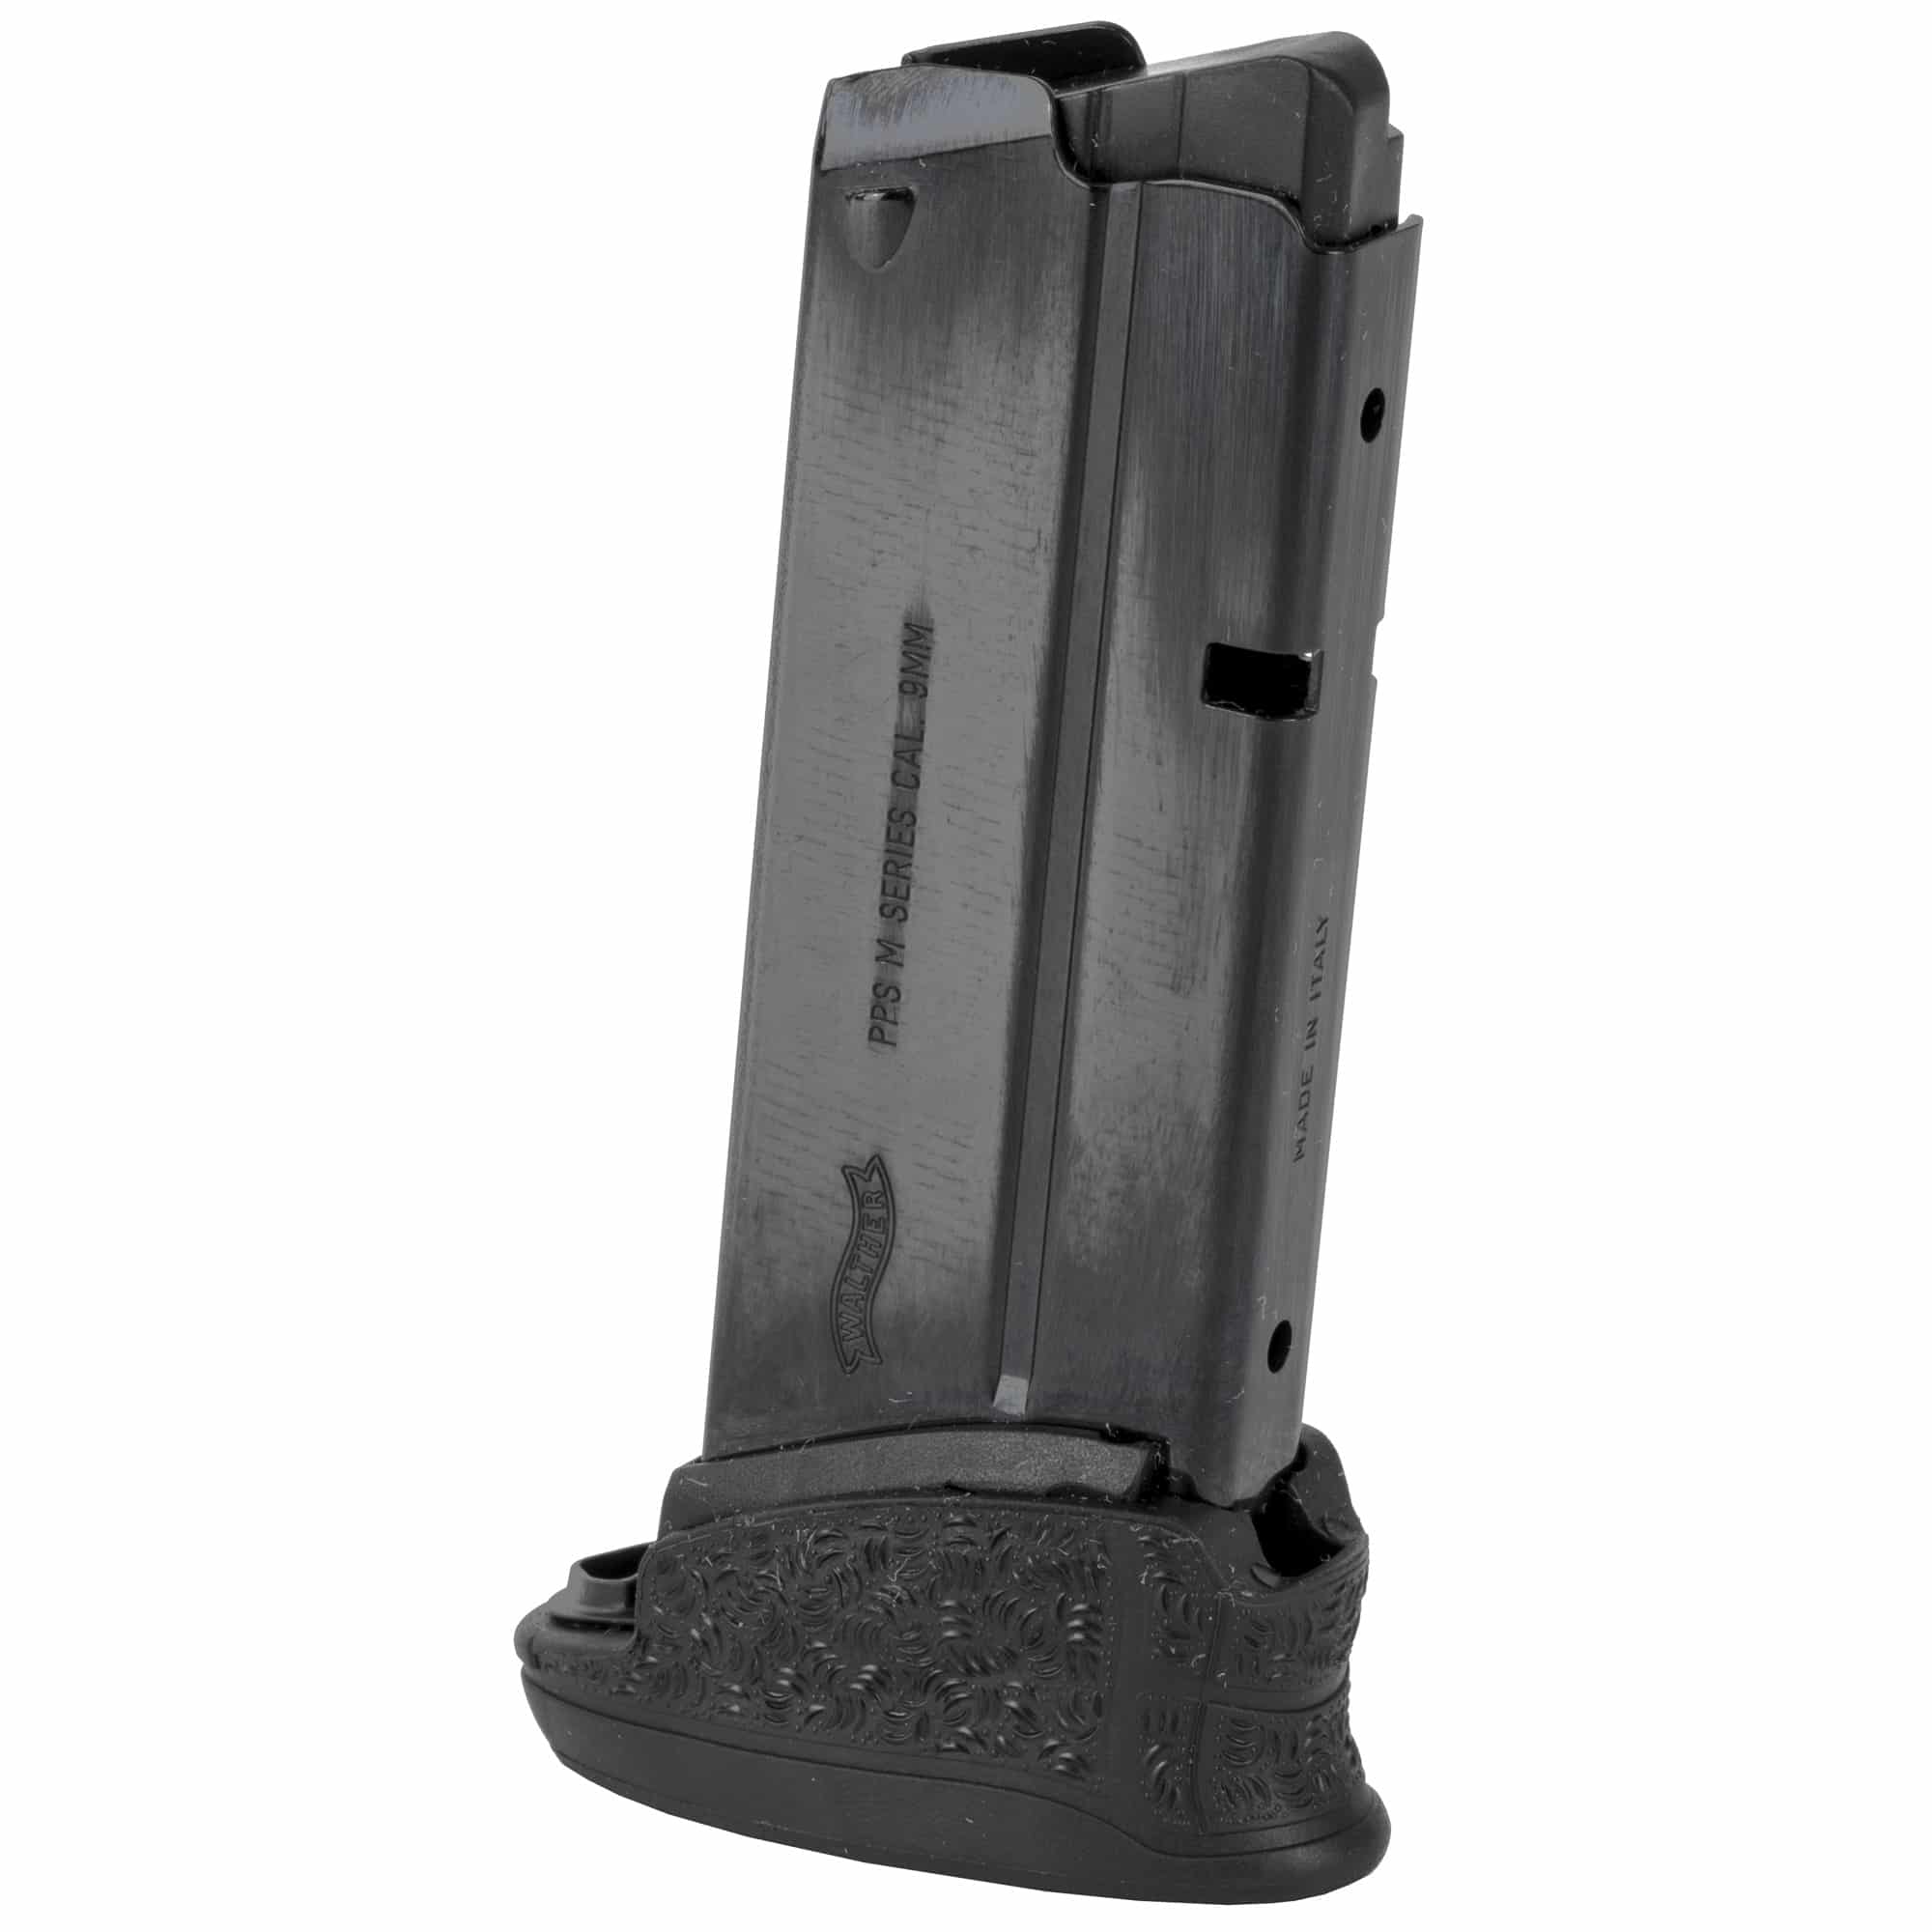 Walther PPS M2 Magazine 7 Round 9mm Mag-2807793 